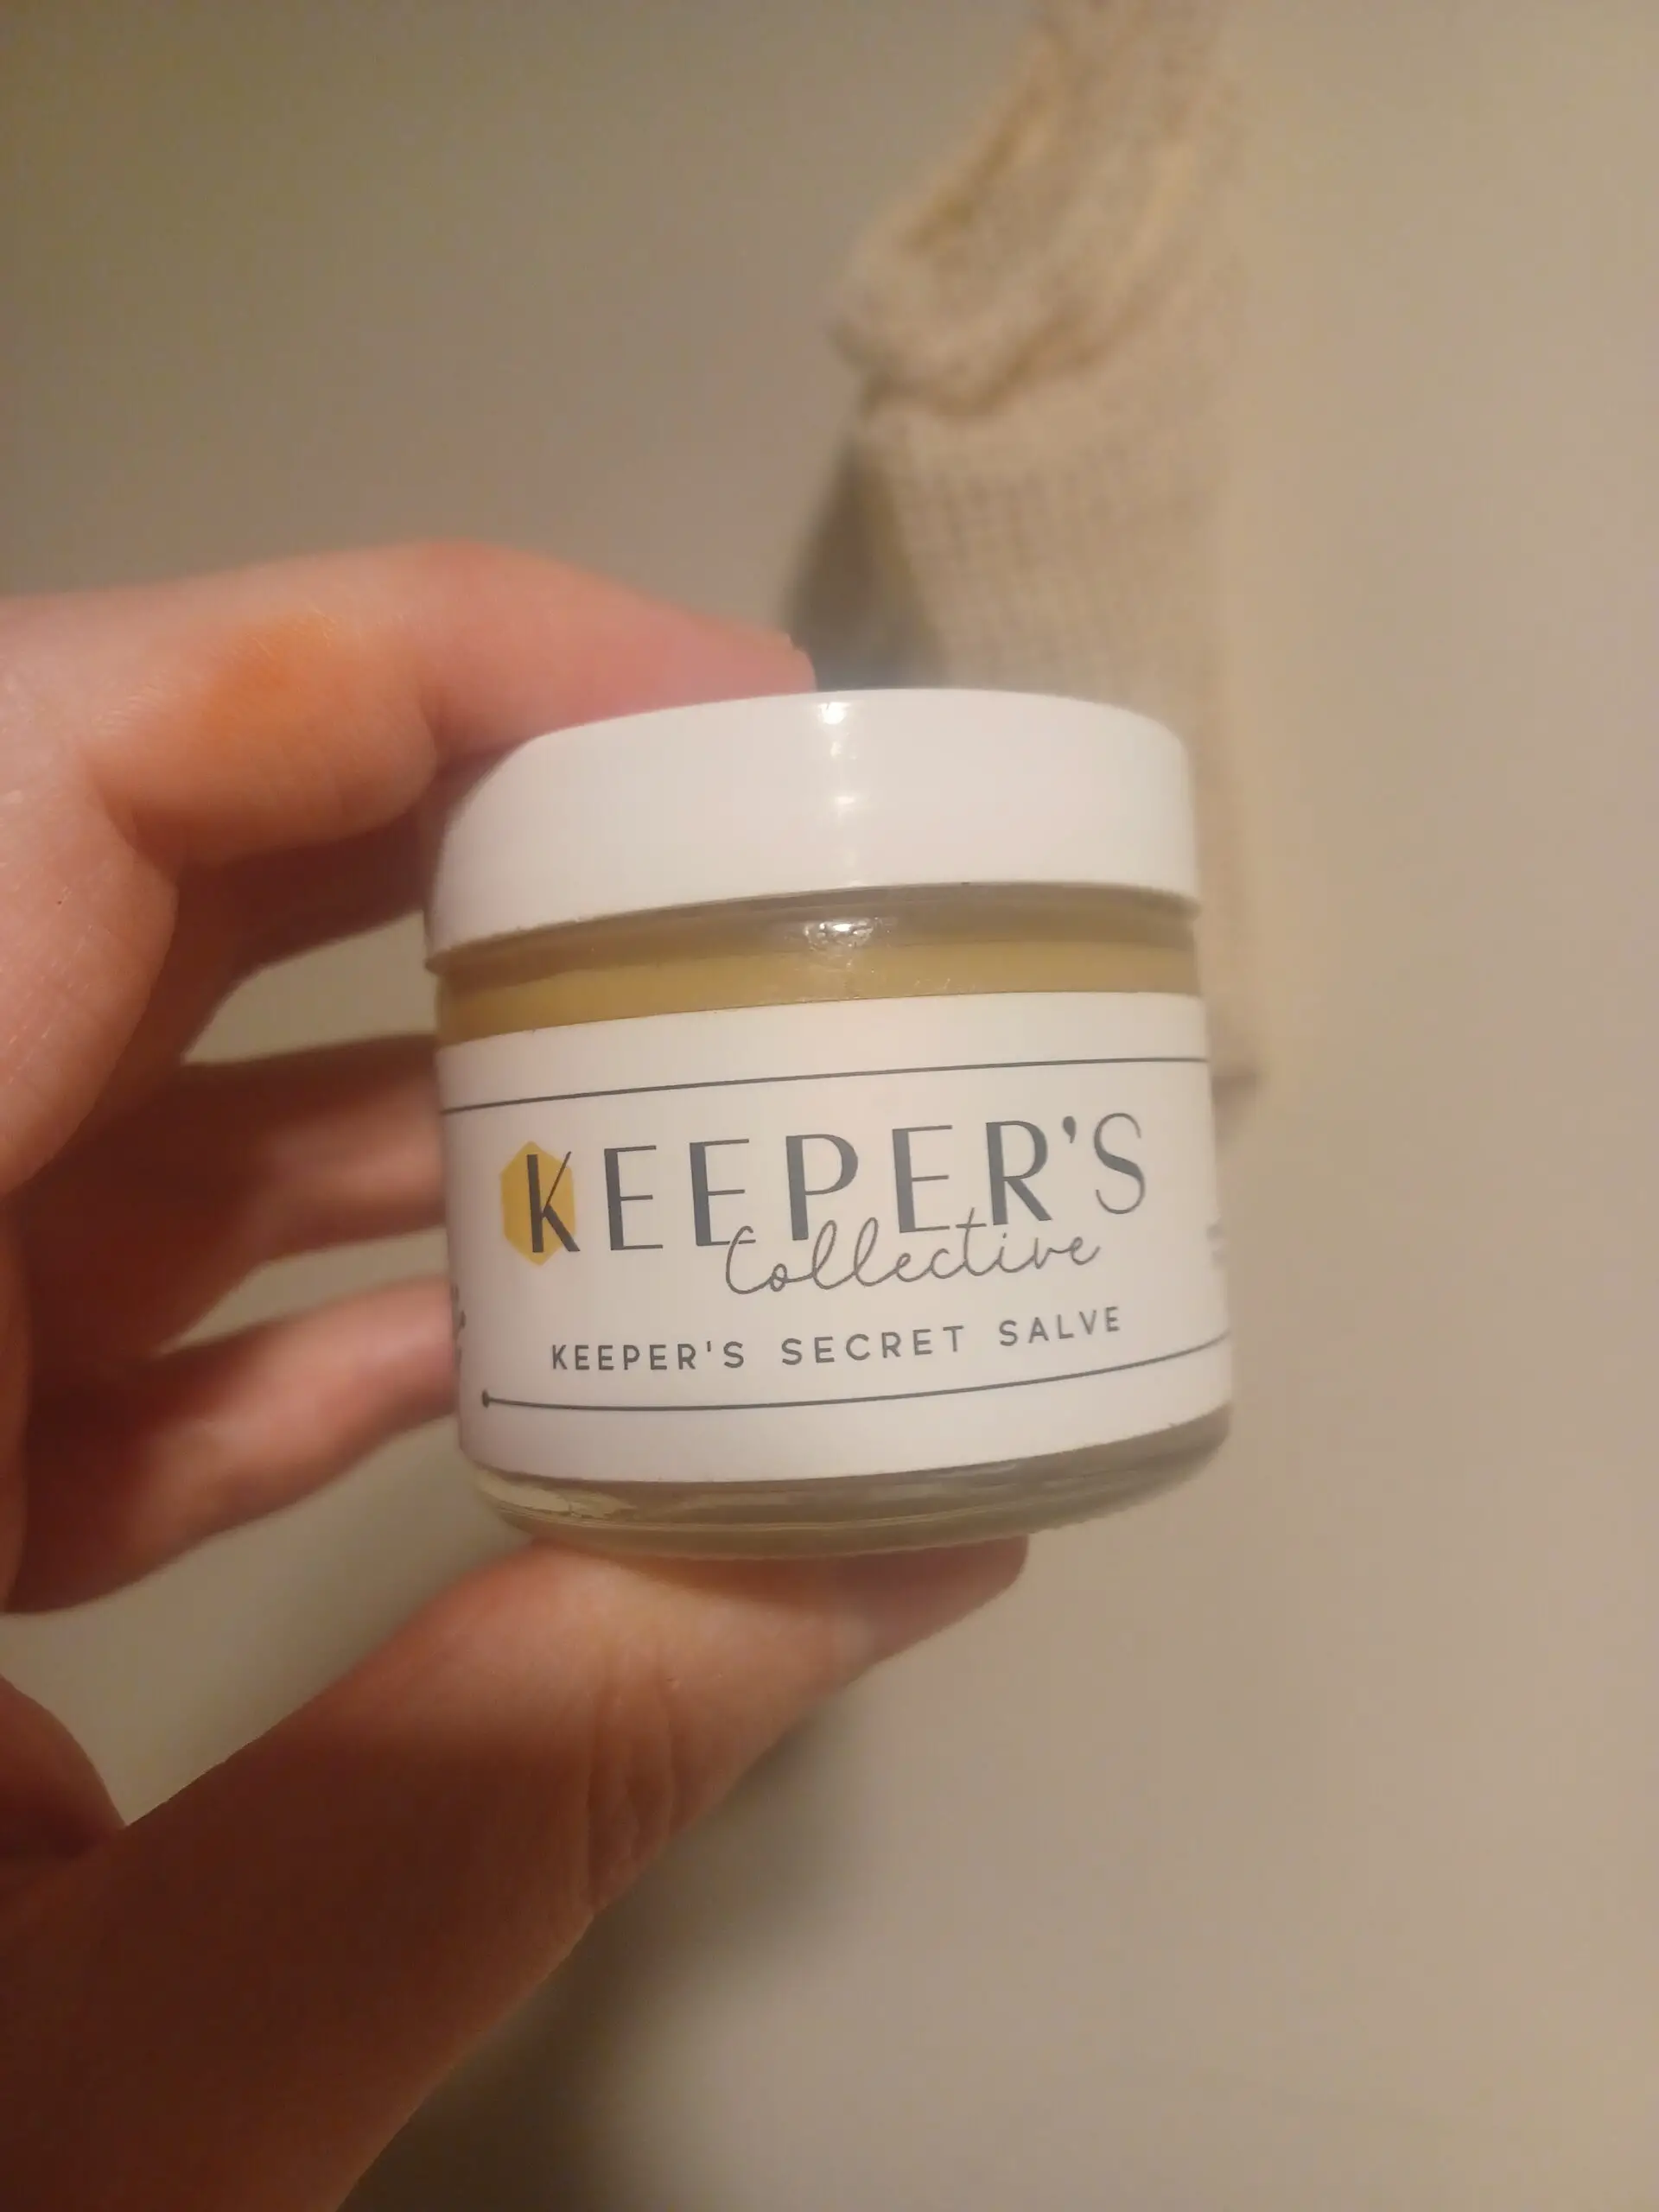 Keeper's Secret produces outstanding salves that help to heal skin topically. The salve penetrates deep into pores for total health. 